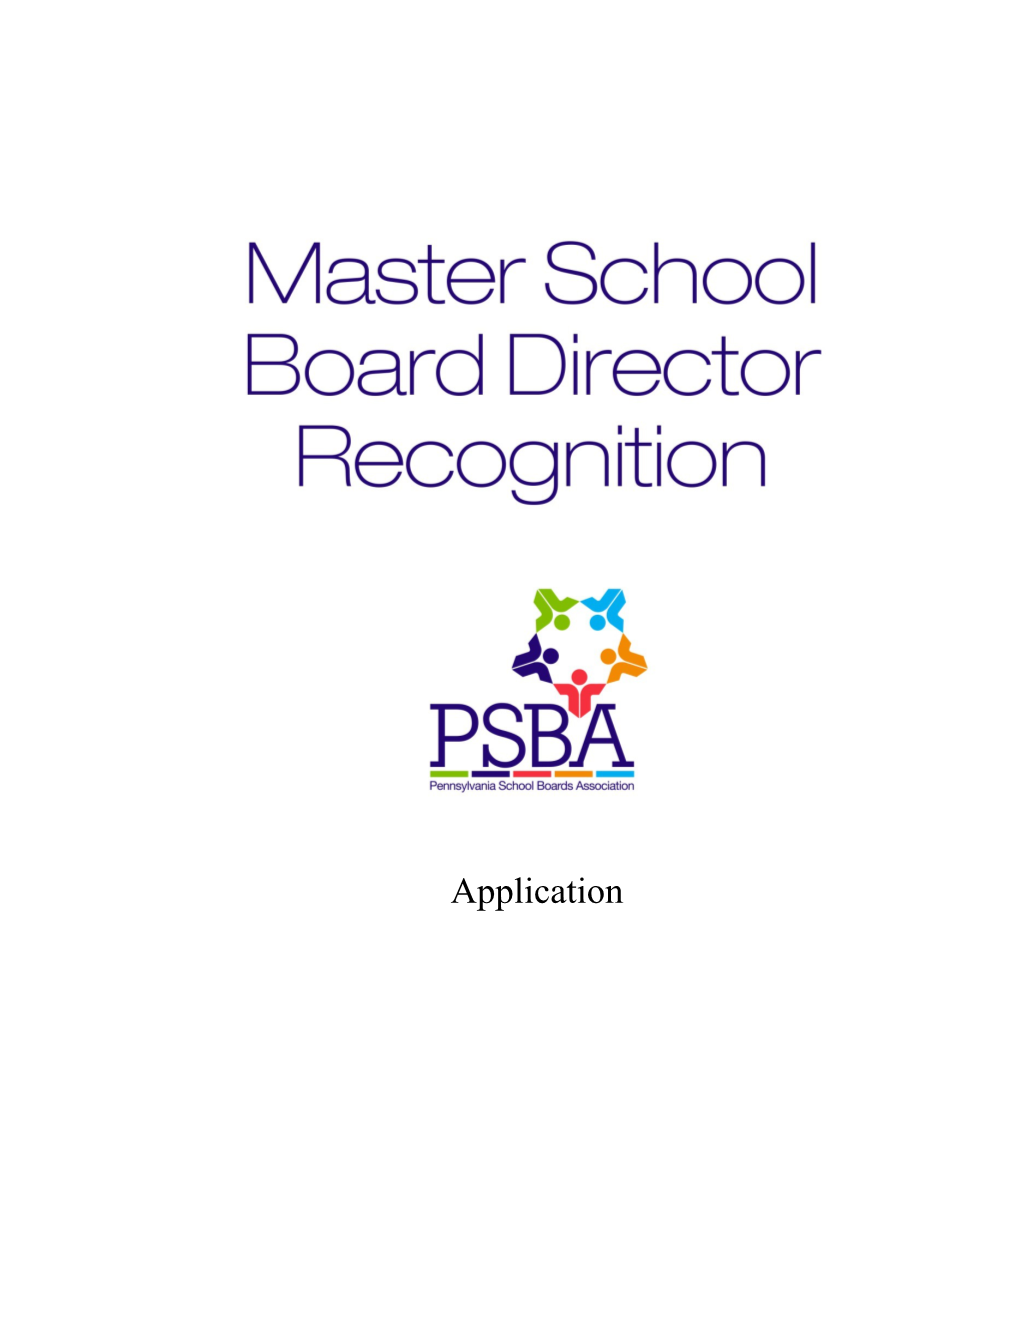 Please Read the Application Completely and Reflect on Your Board Work and Fully Review